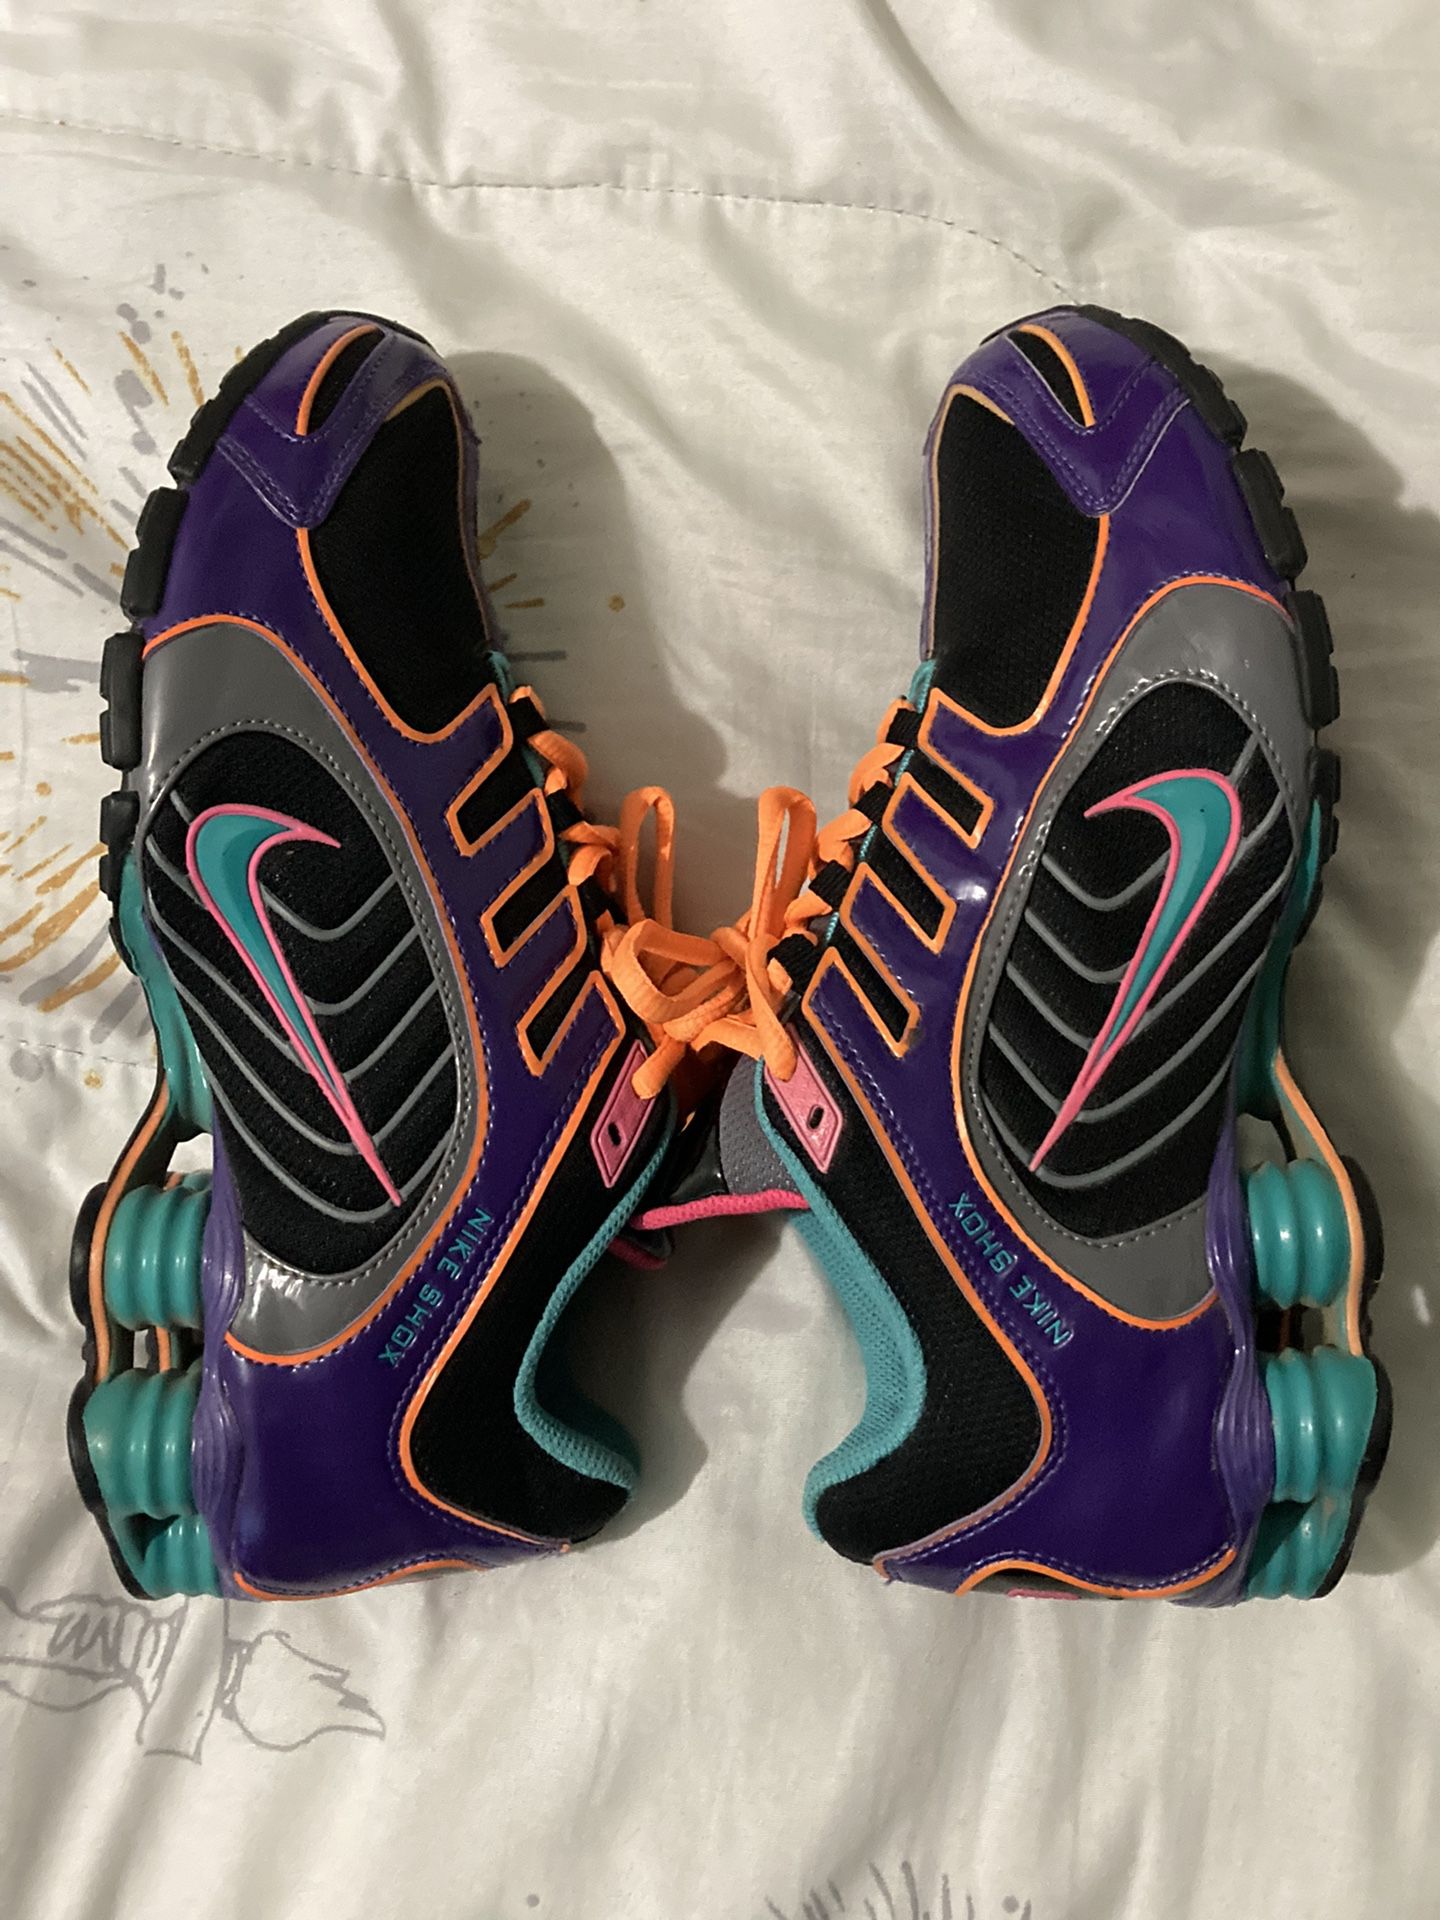 Factura Madison submarino WMNS Nike Shox Navina for Sale in Fresno, CA - OfferUp